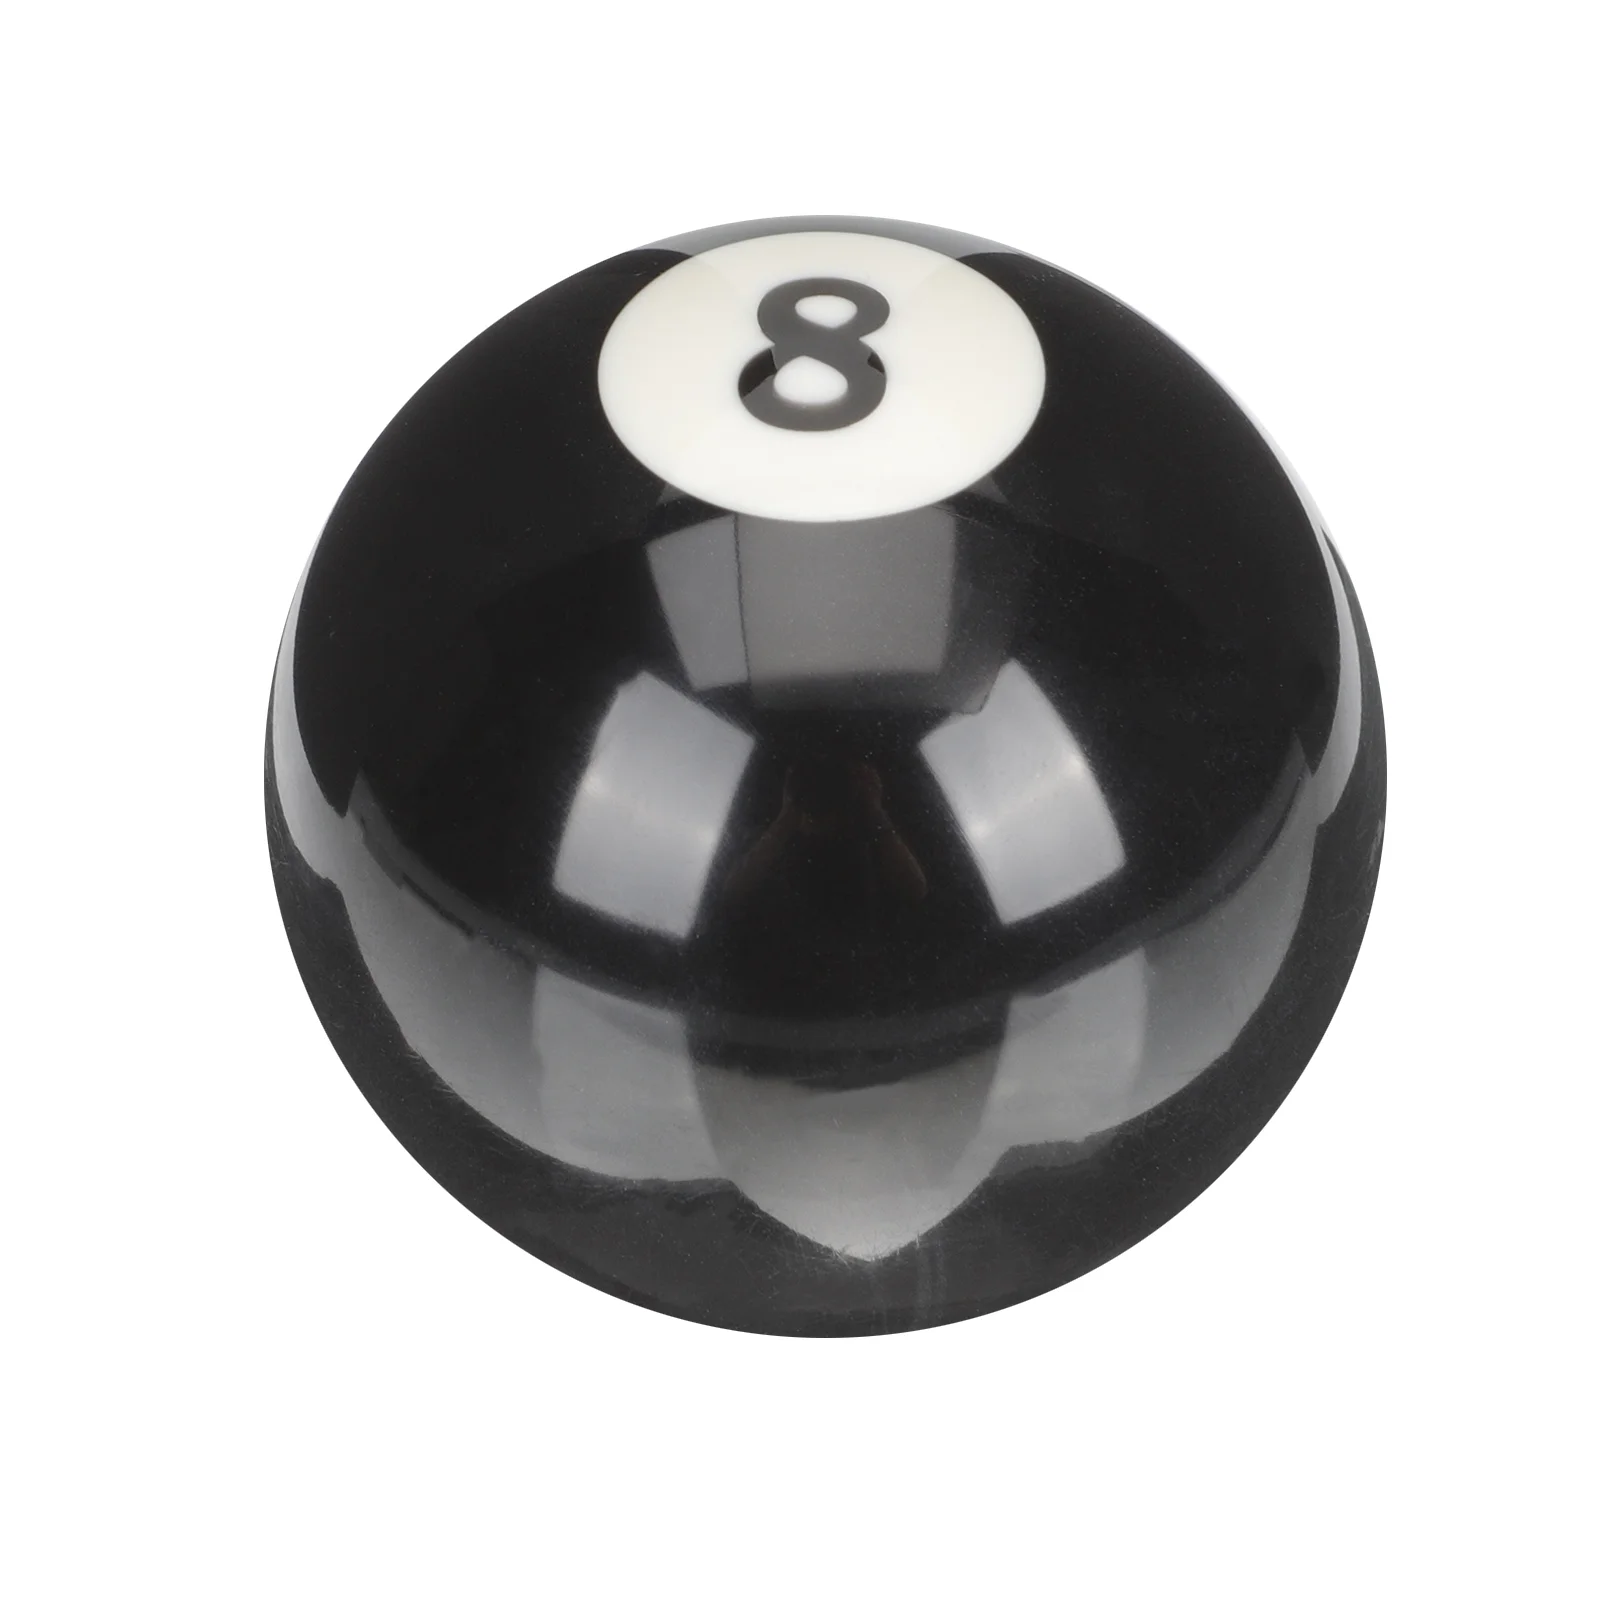 

Billiards Black Eight Ball Resin Cue Snooker Table Professional Replaceable Accessories Pool